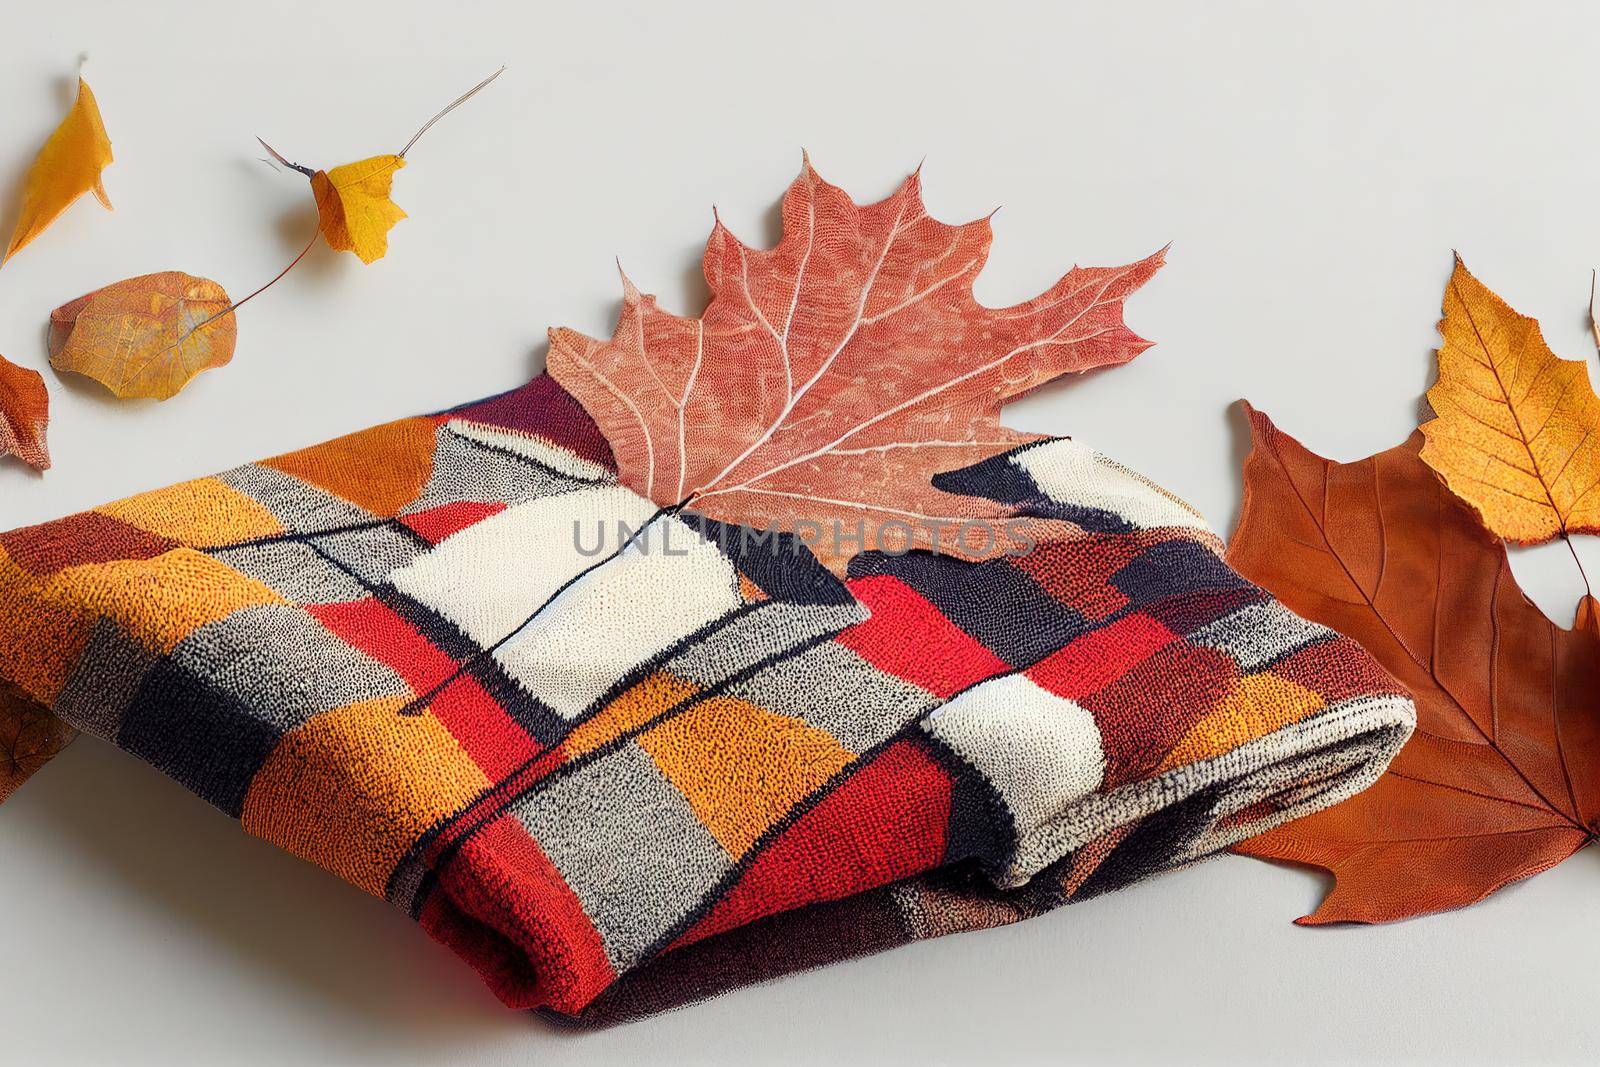 Autumn composition Sweater, plaid, autumn leaves on white background by 2ragon